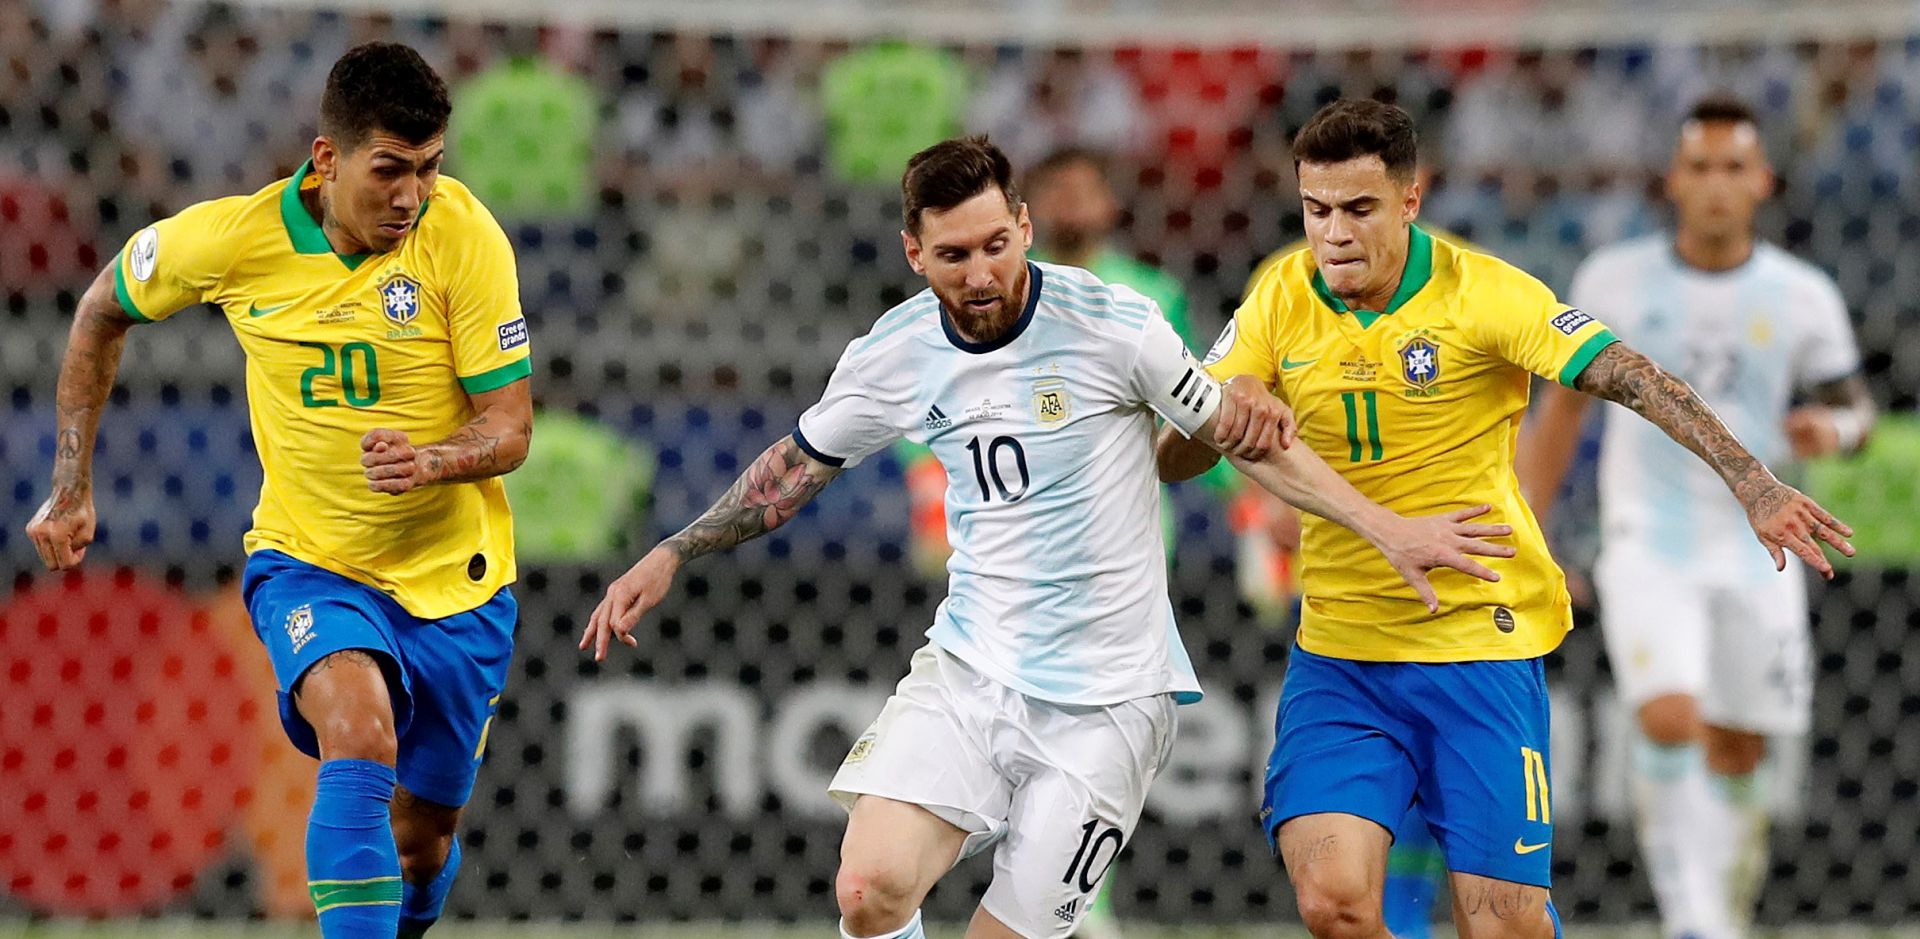 epa07690920 Argentina's Lionel Messi (C) in action against Roberto Firmino (L) and Philippe Coutinho (R) during the Copa America 2019 semi-finals soccer match between Brazil and Argentina at Mineirao Stadium in Belo Horizonte, Brazil, 02 July 2019.  EPA/Antonio Lacerda